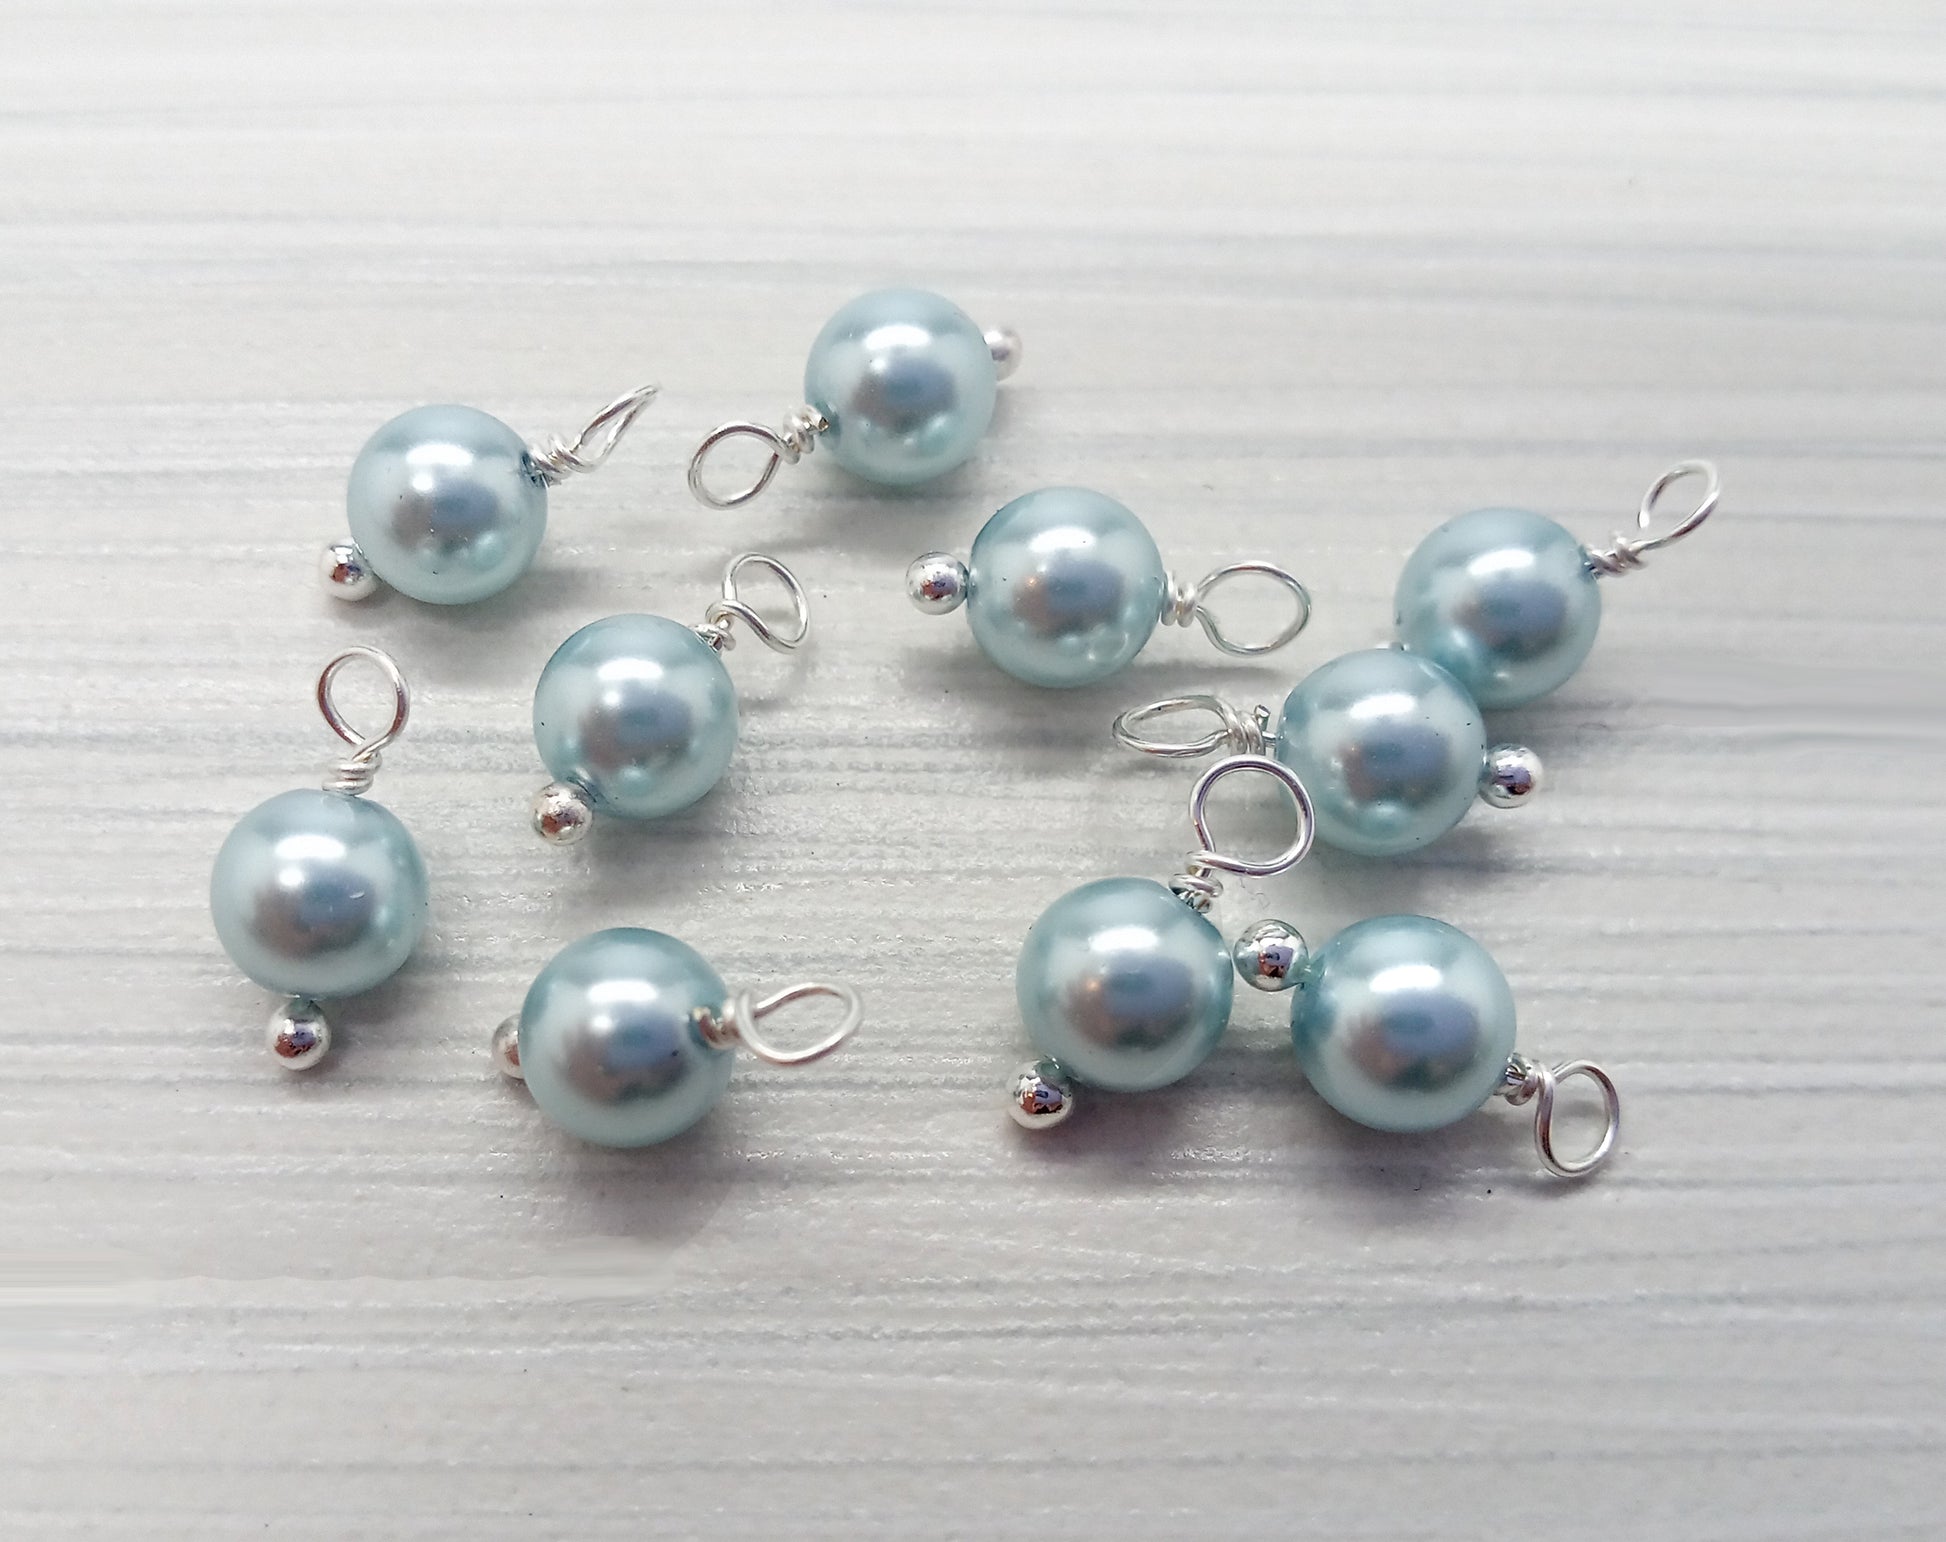 Crystal Pearl Bead Charms, Small Light Blue 6mm Dangles - Adorabilities Charms & Trinkets